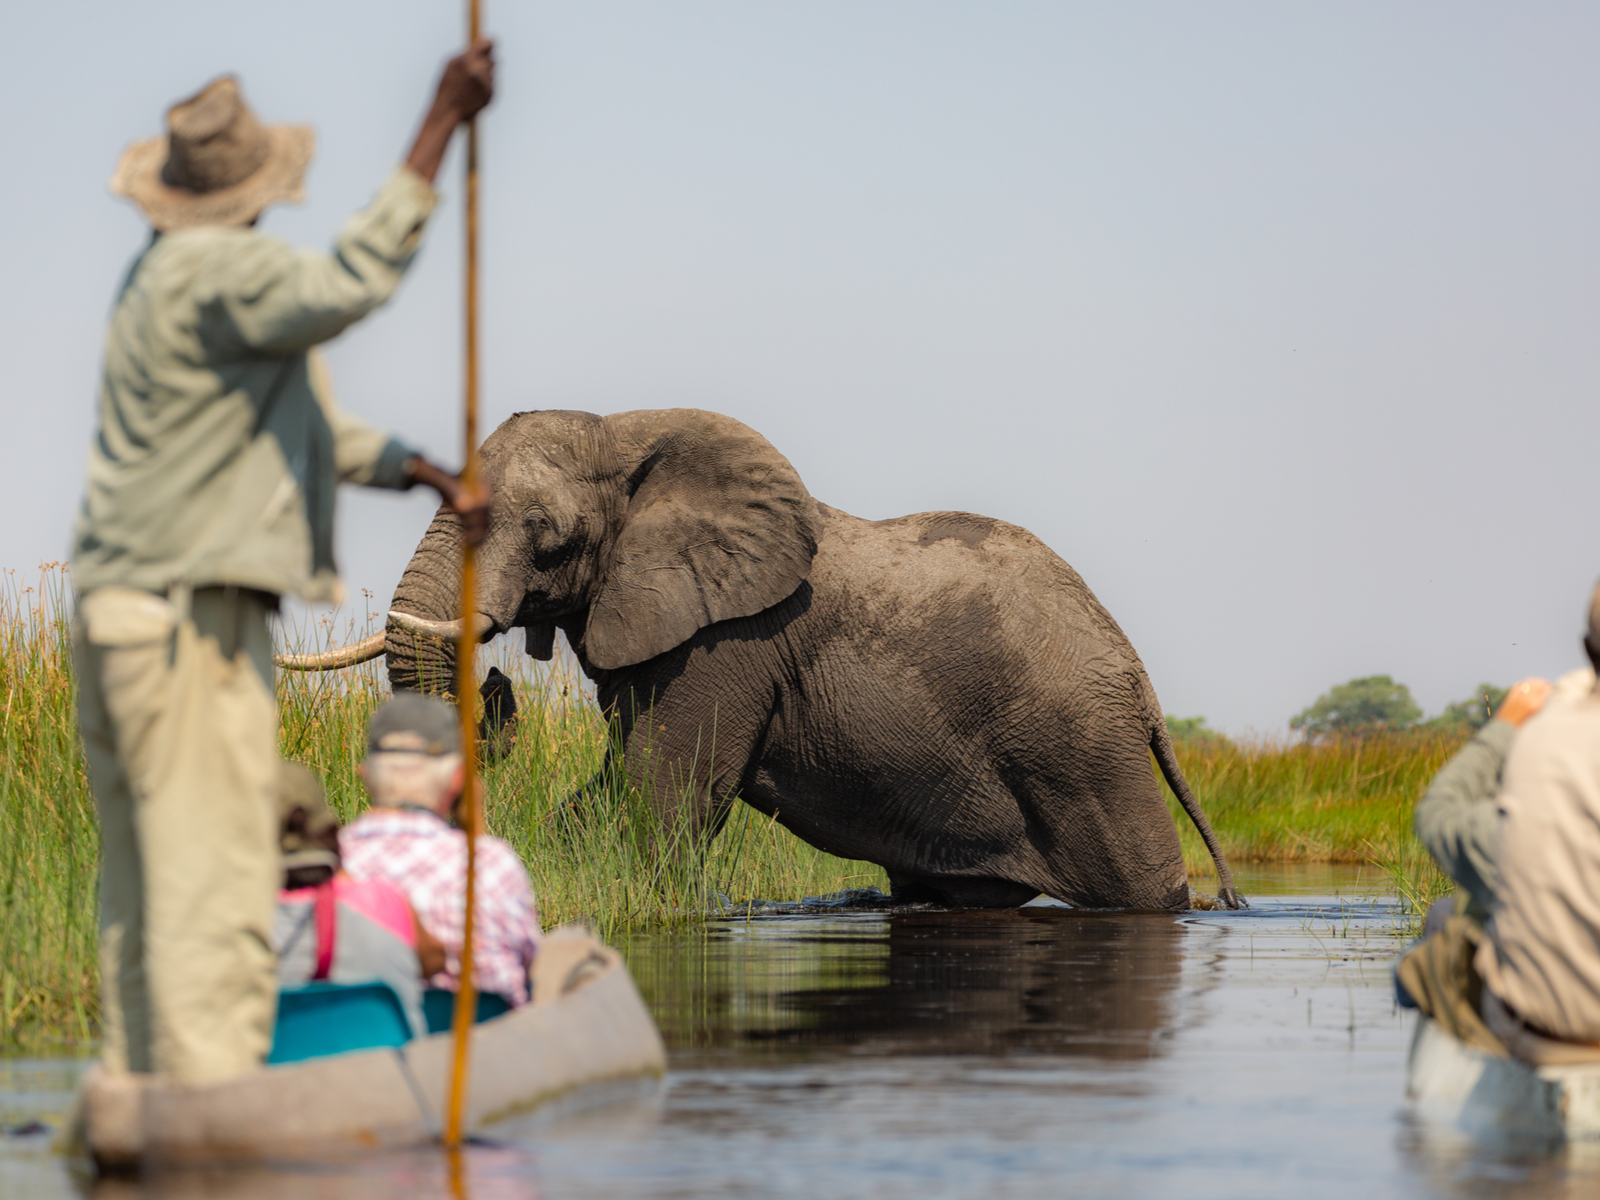 Tourists on one of the best safaris in Africa in the Okavango Delta watching an elephant cross the river while sitting in boats